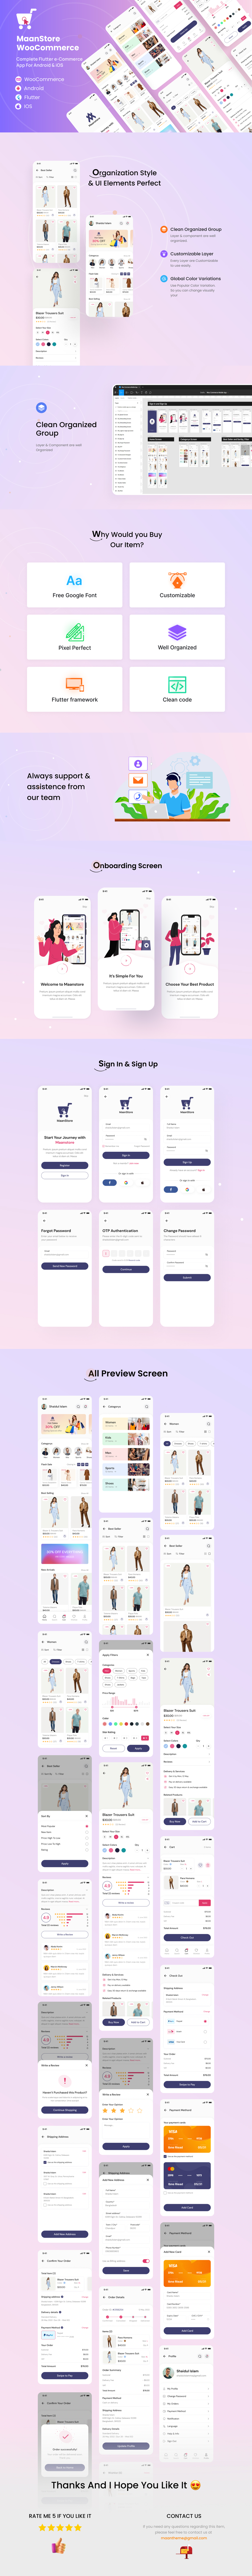 MaanStore WooCommerce - Complete Flutter eCommerce App For Android & iOS - 1